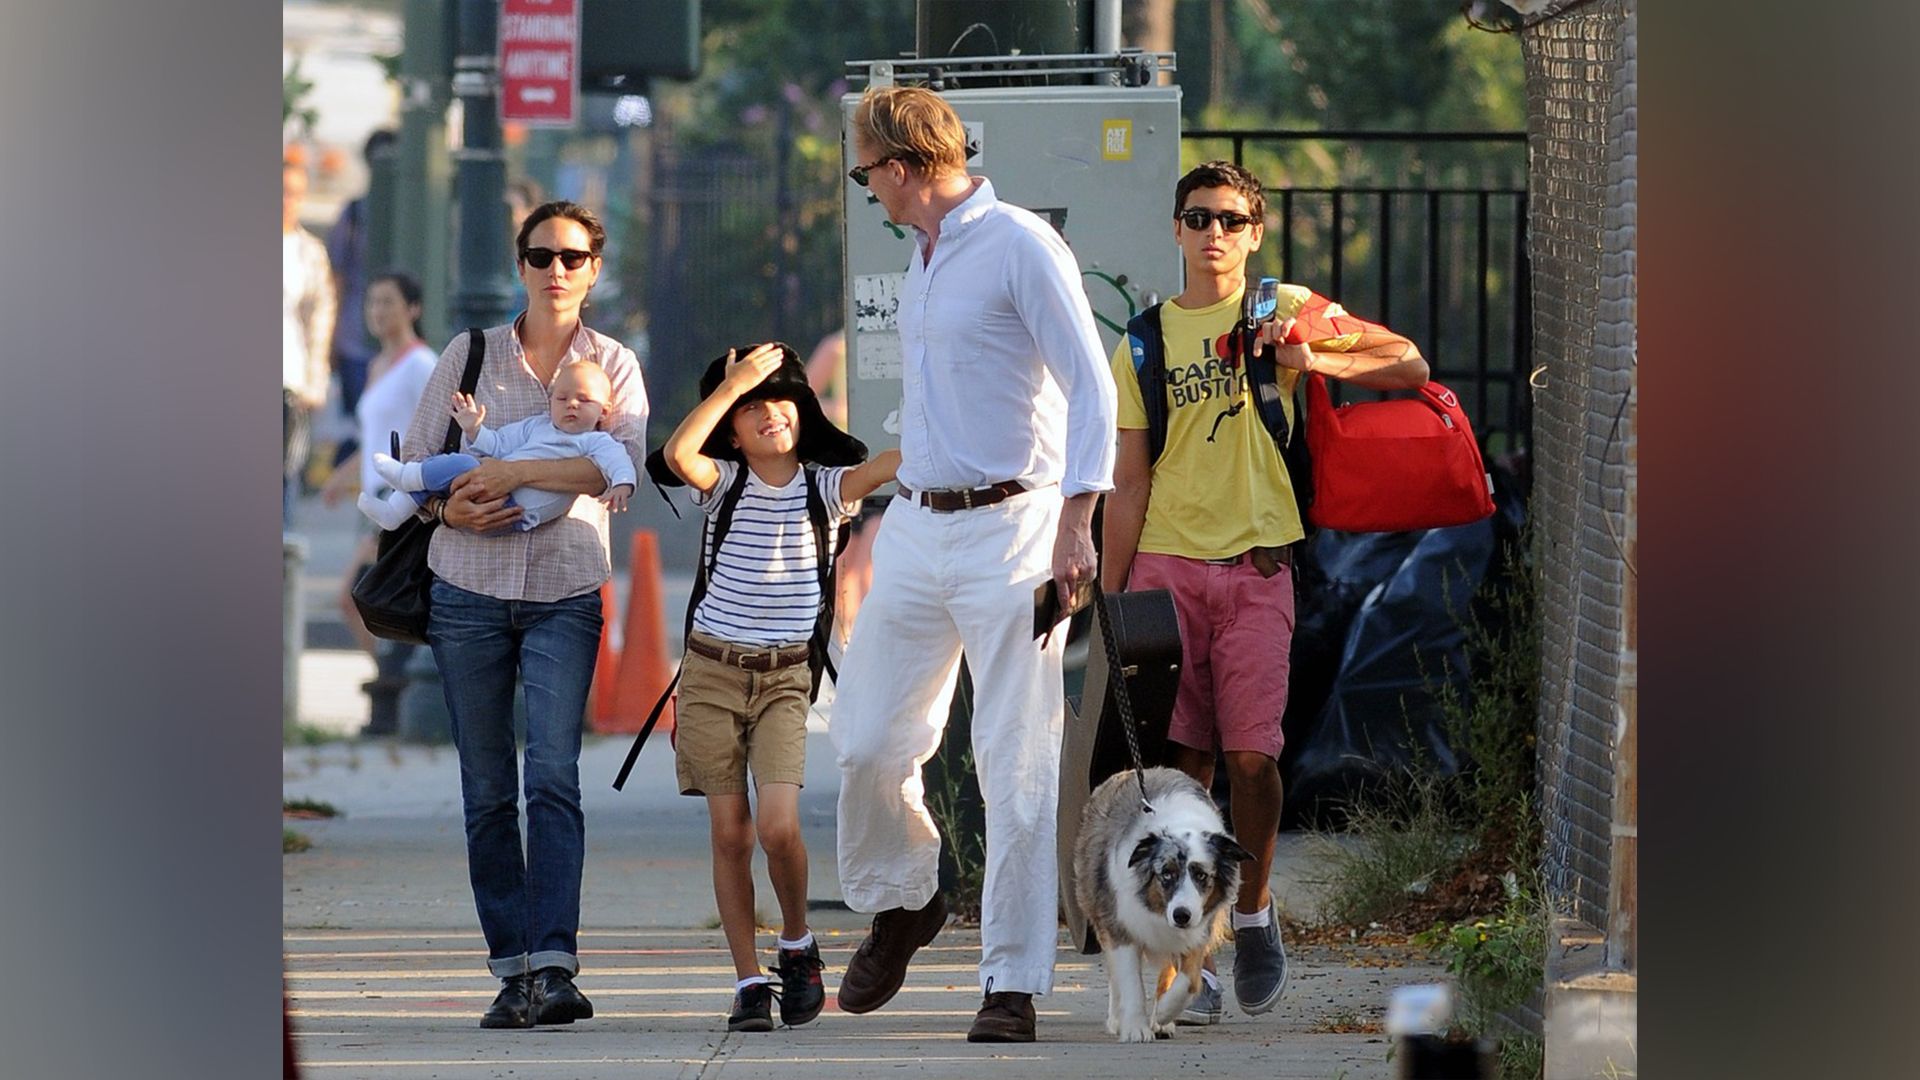 Jennifer Connelly, her husband and children are walking